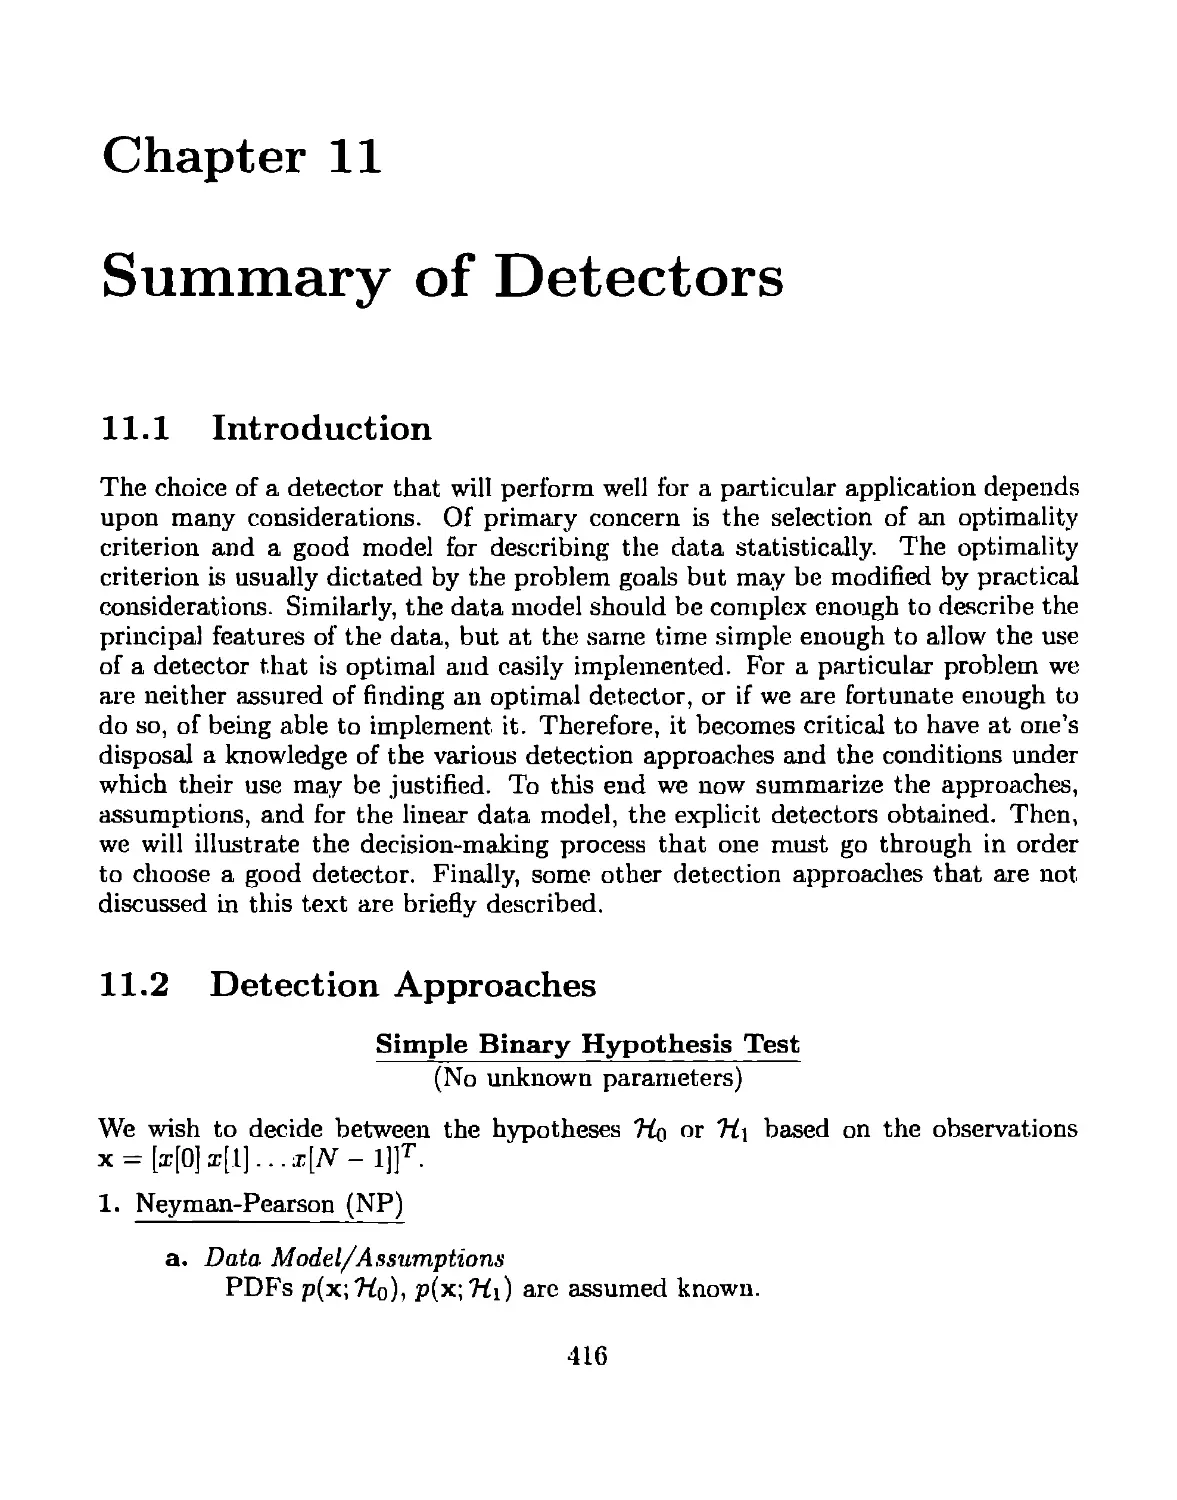 11 Summary of Detectors
11.2 Detection Approaches